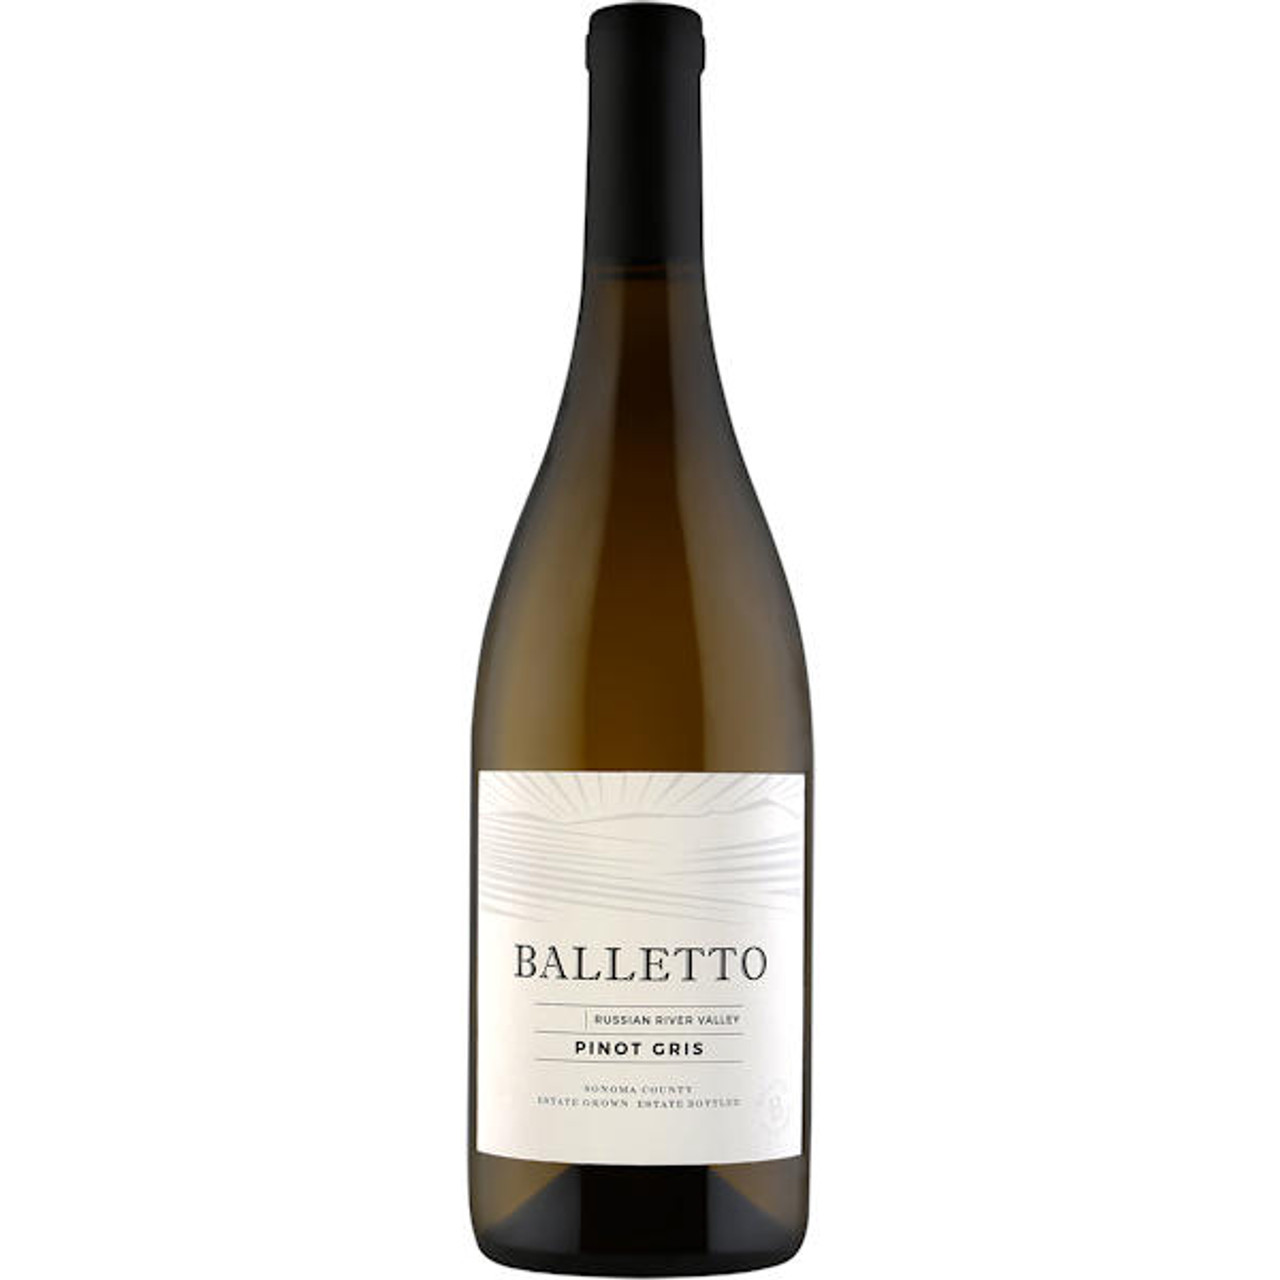 Balletto Russian River Pinot Gris